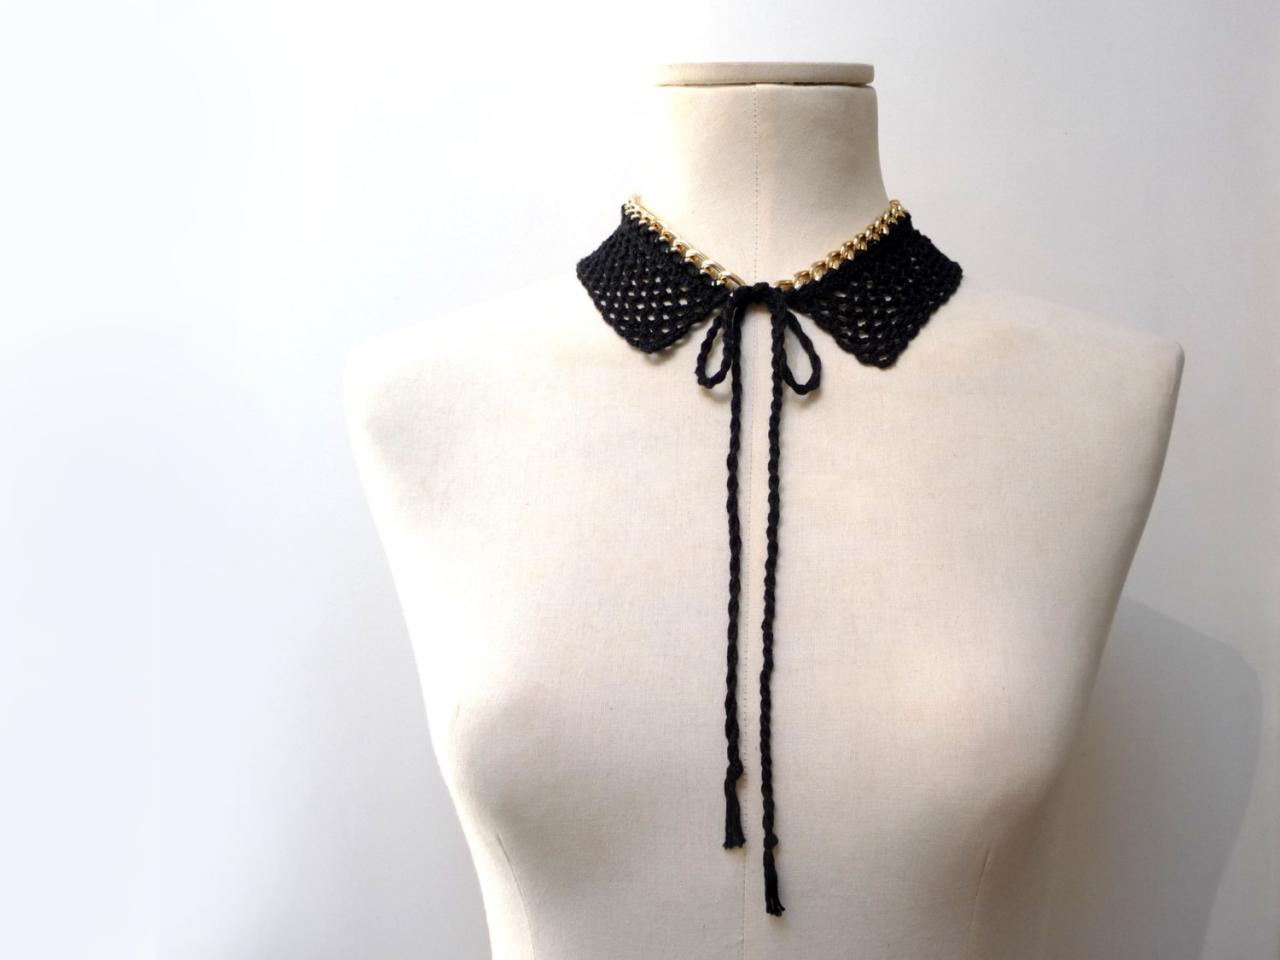 Peter Pan Collar Crochet Necklace - Gold Metal Chain And Black Cotton